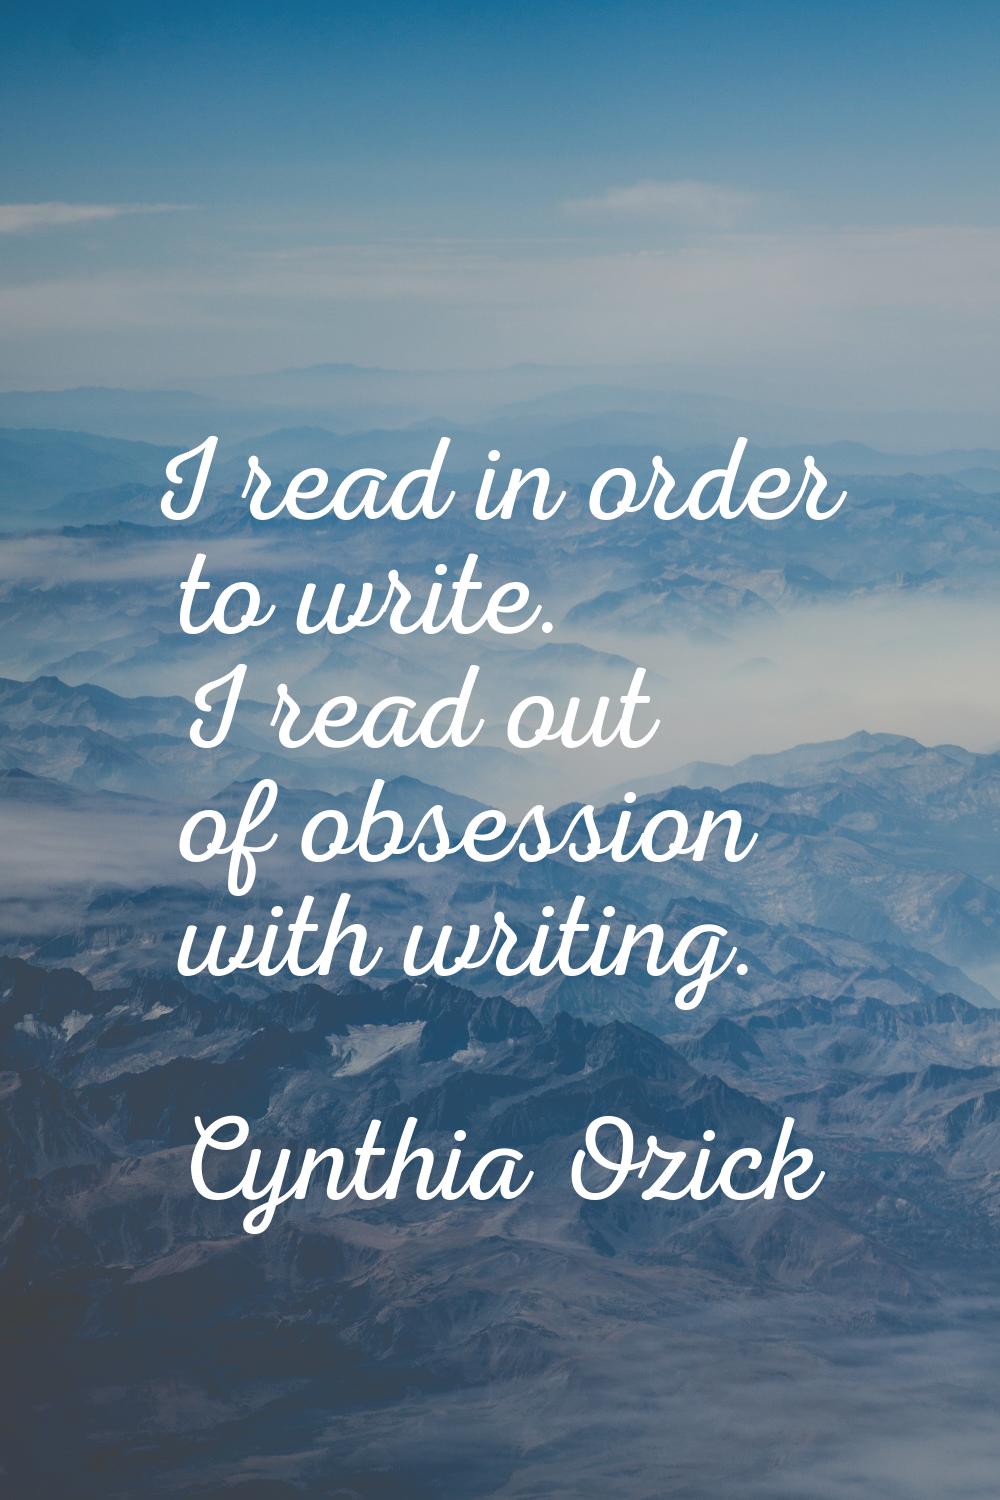 I read in order to write. I read out of obsession with writing.